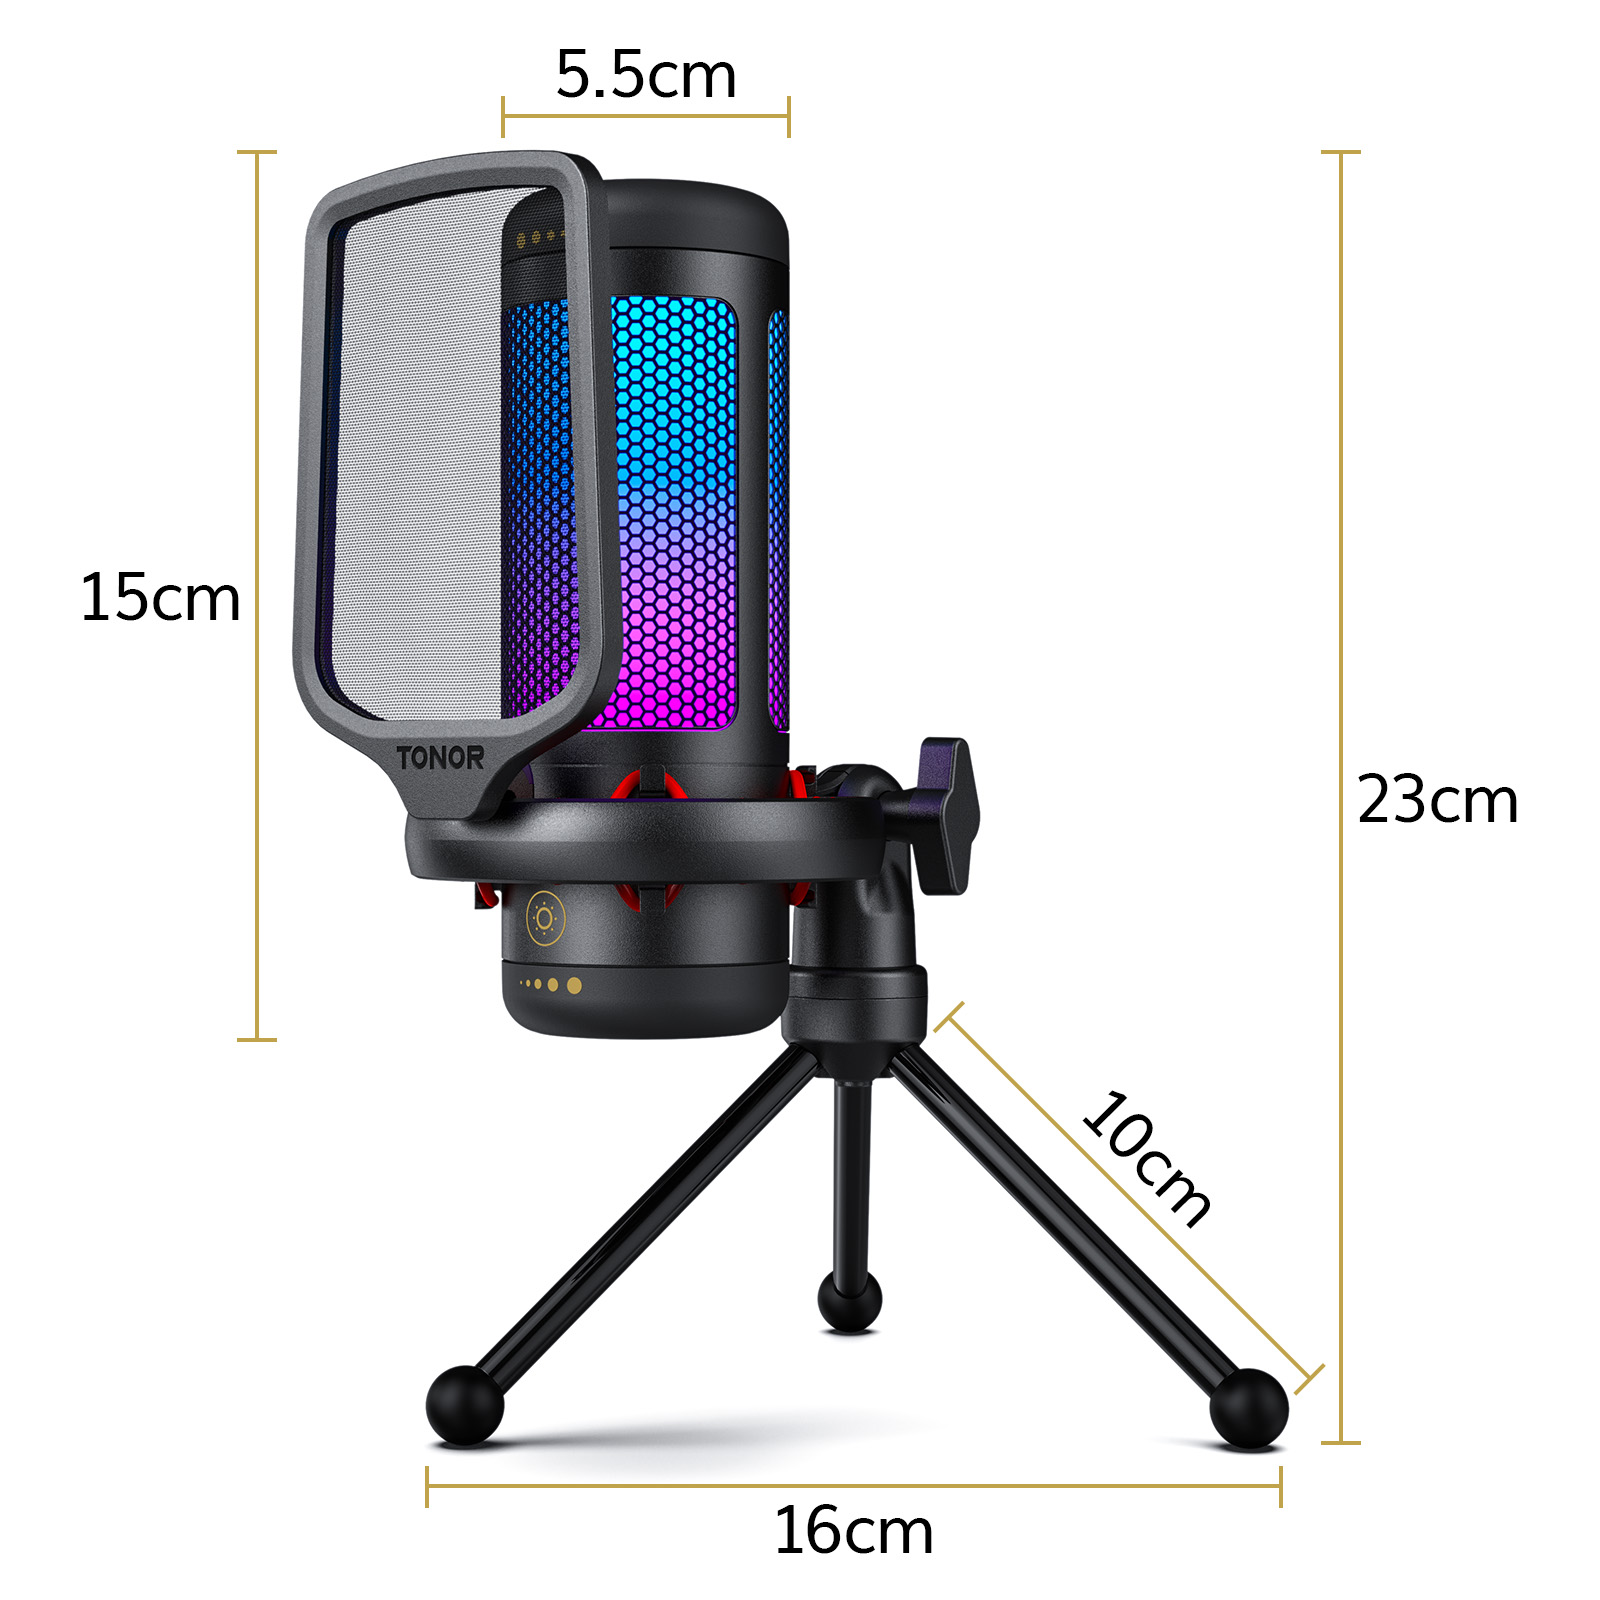 

Usb Microphone For Pc Computer, Cardioid Condenser Mic With Adjustable Rgb Modes & Brightness, Quick Mute, Gain Control, For Streaming, Podcasting, Recording, Ps4/5 Desktop Mic Tc310